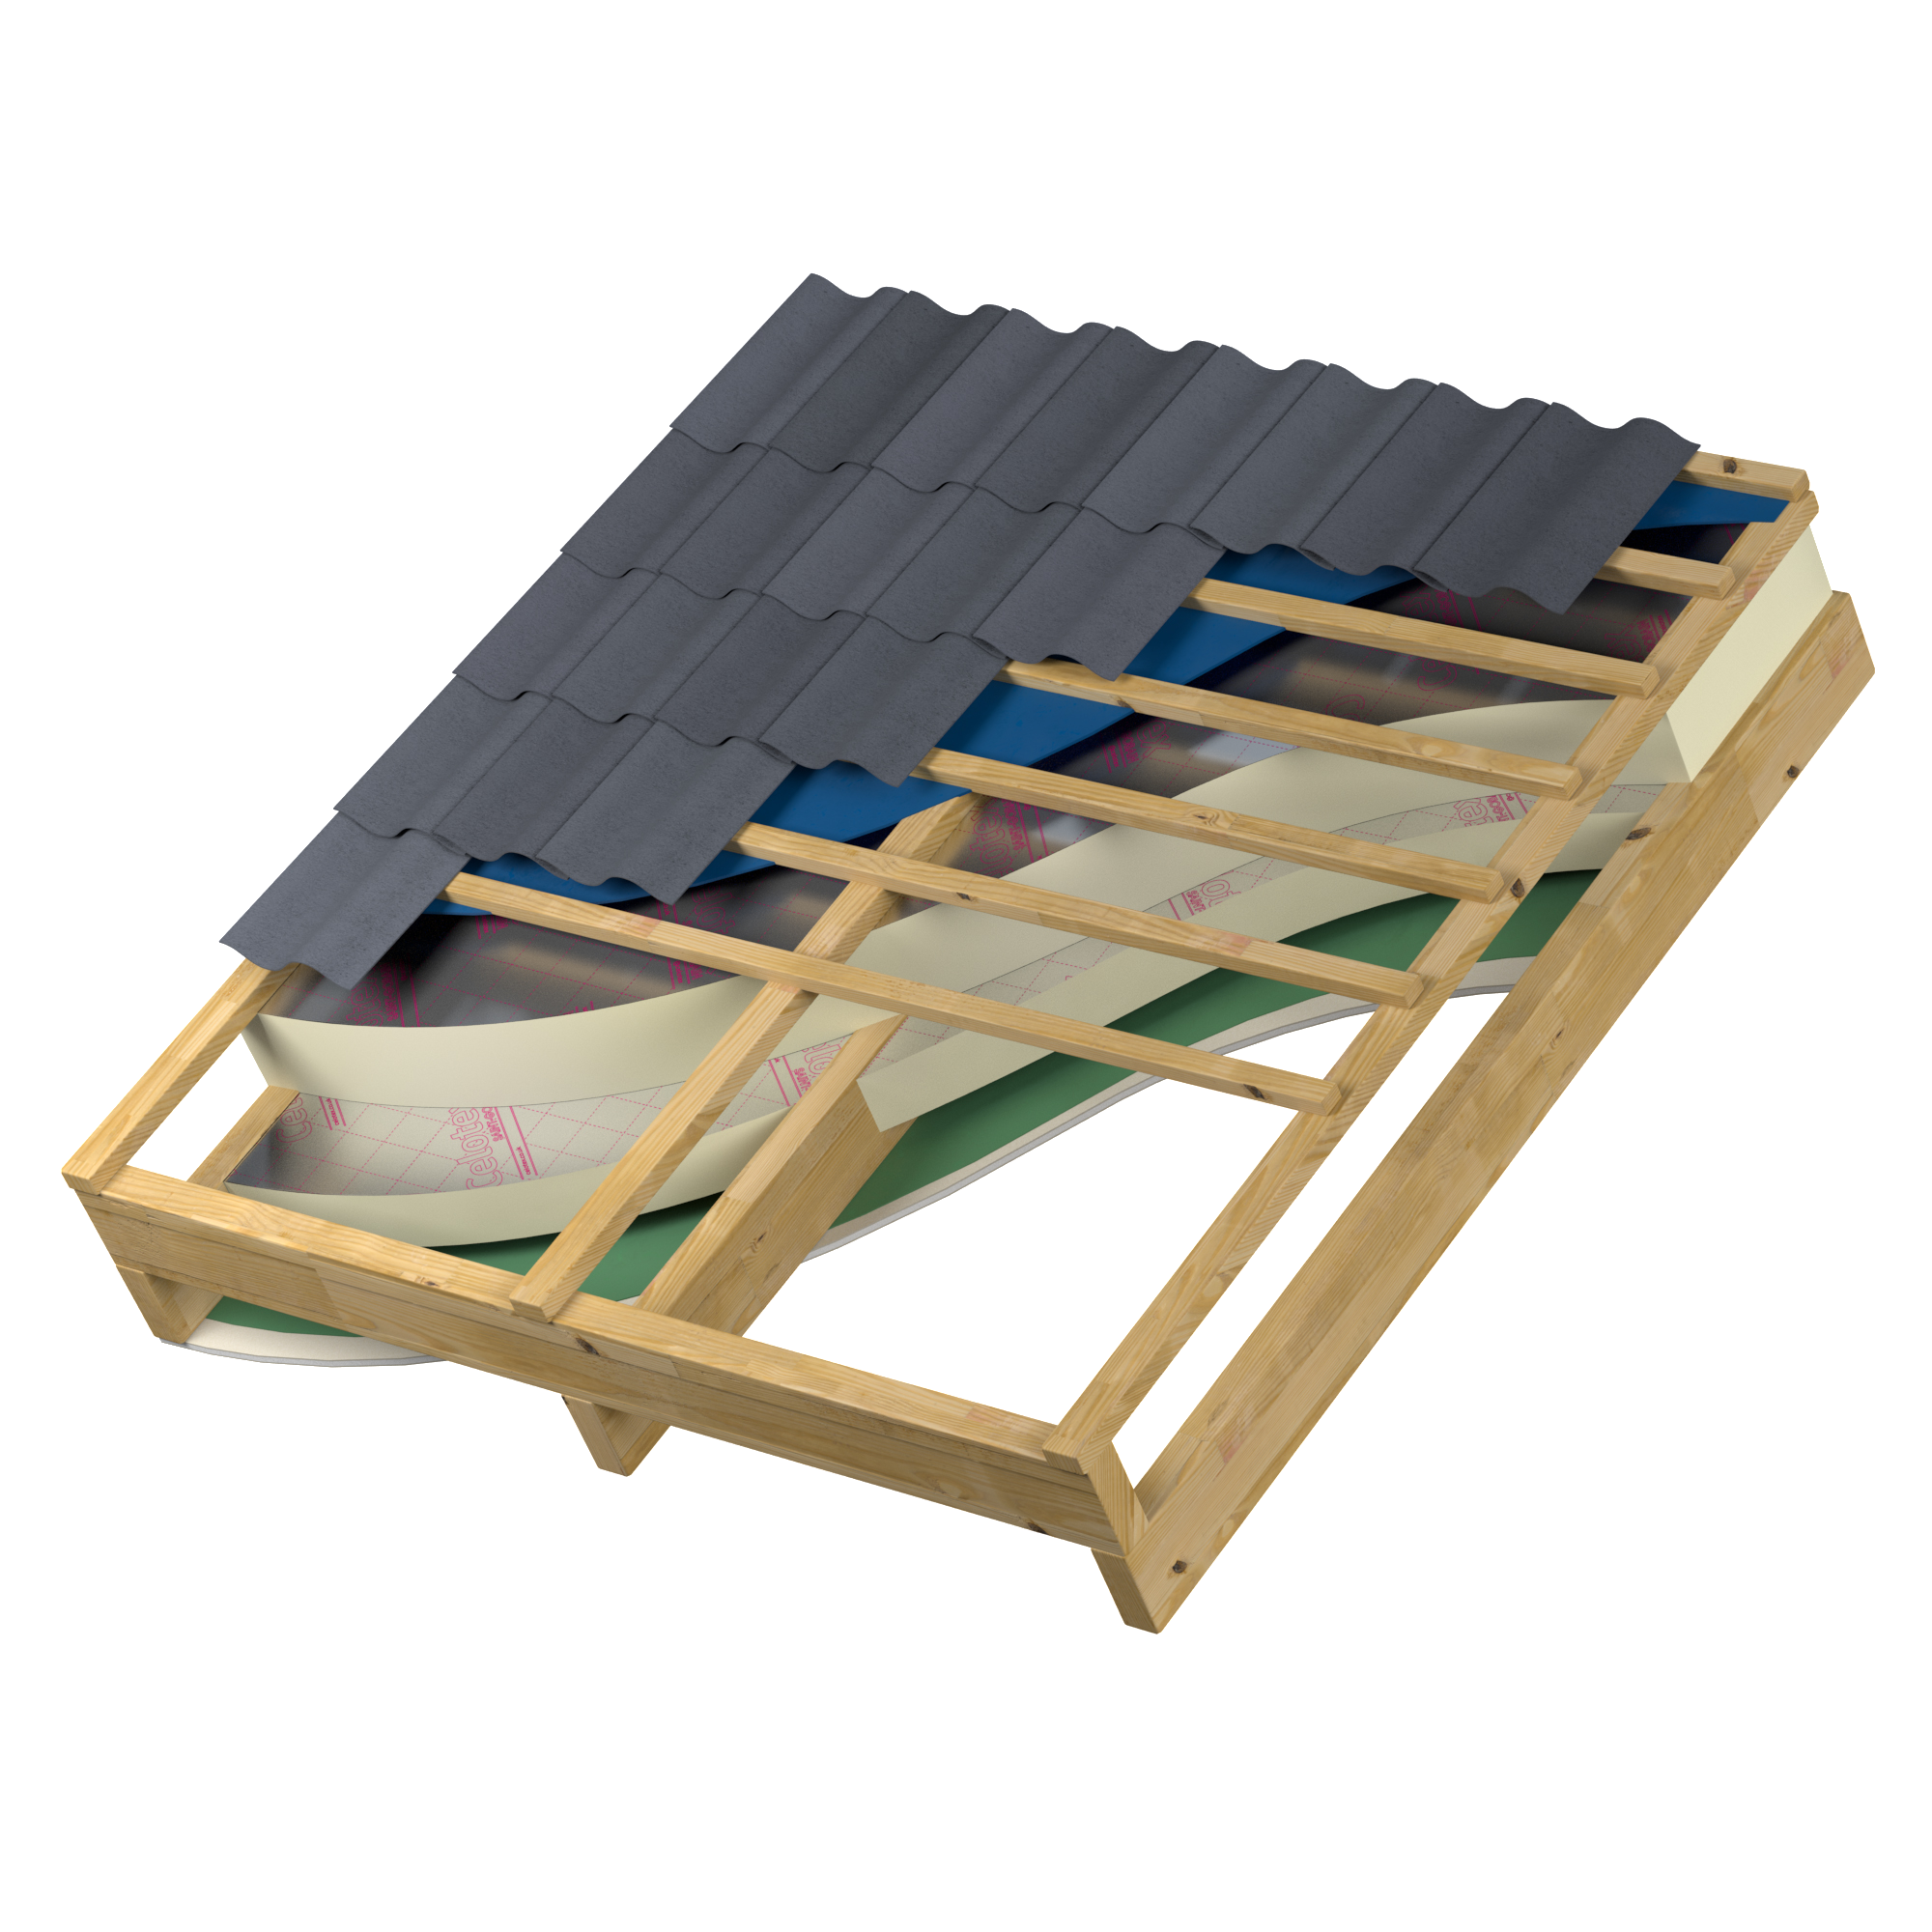 2020 Celotex Pitched roof insulation between and above rafters